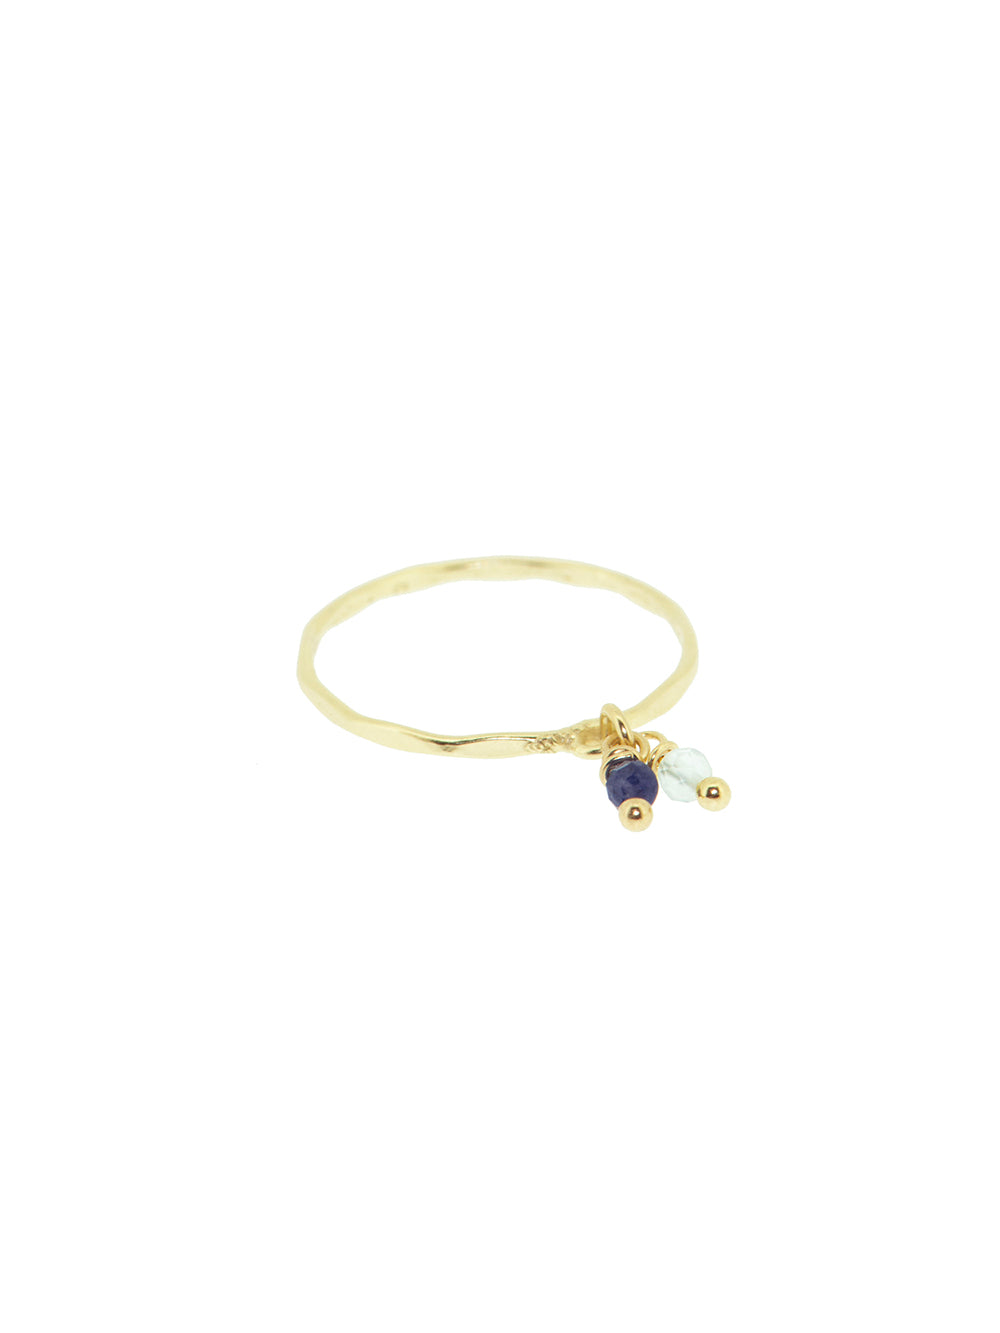 Birthstone ring April - Rock Crystal | 14K Gold Plated